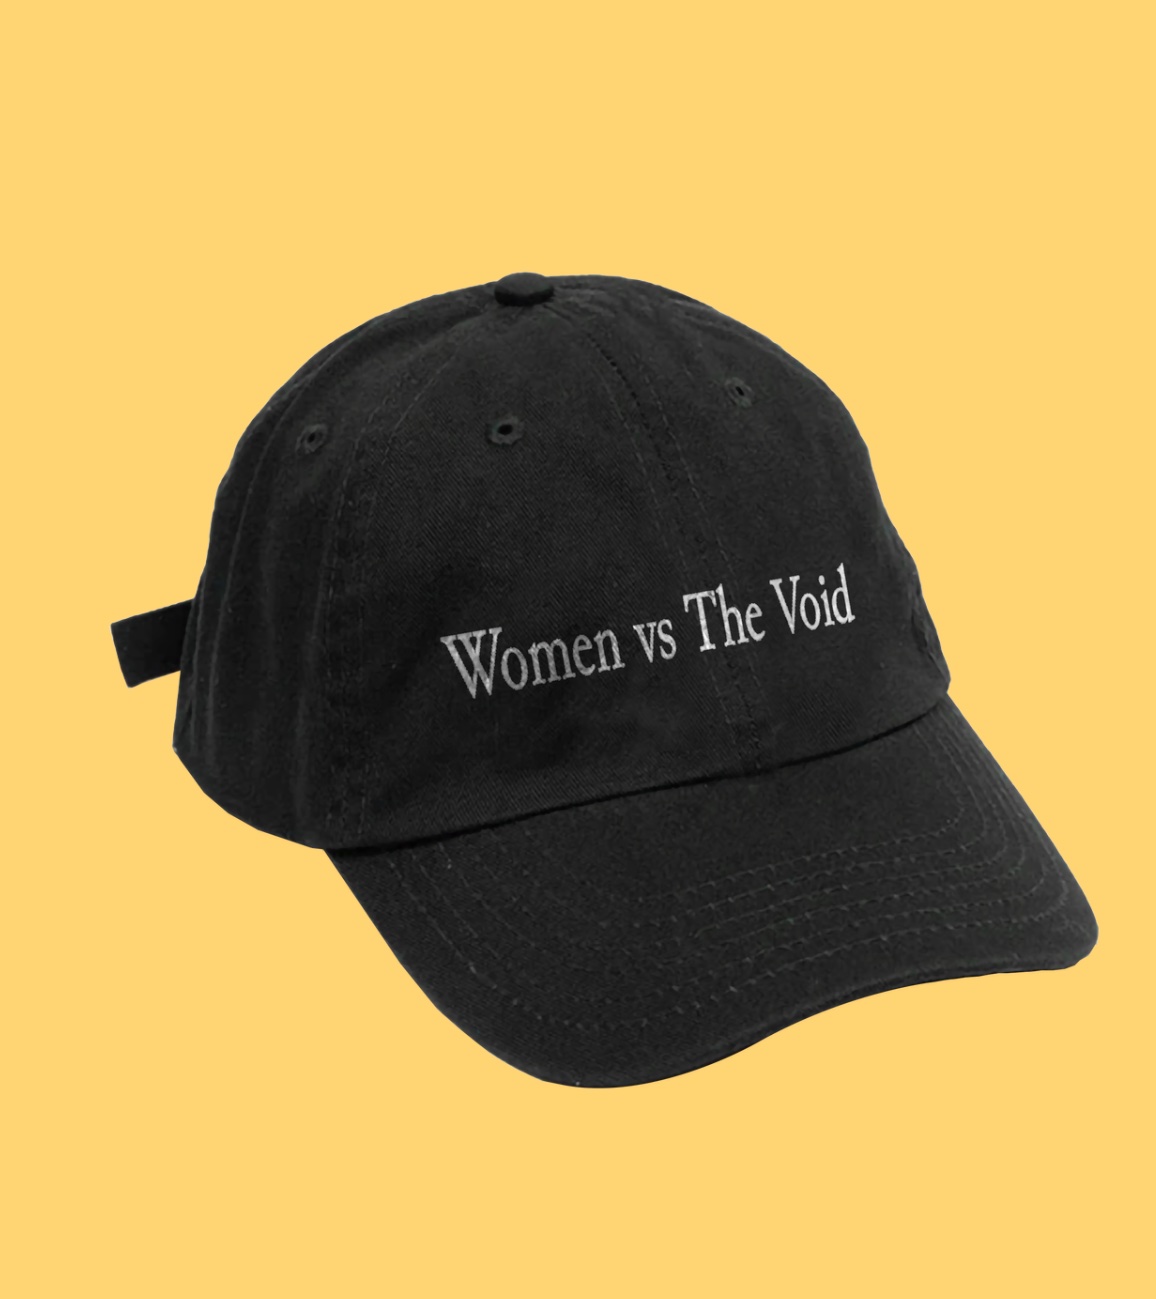 A black baseball hat that says "Women vs The Void"